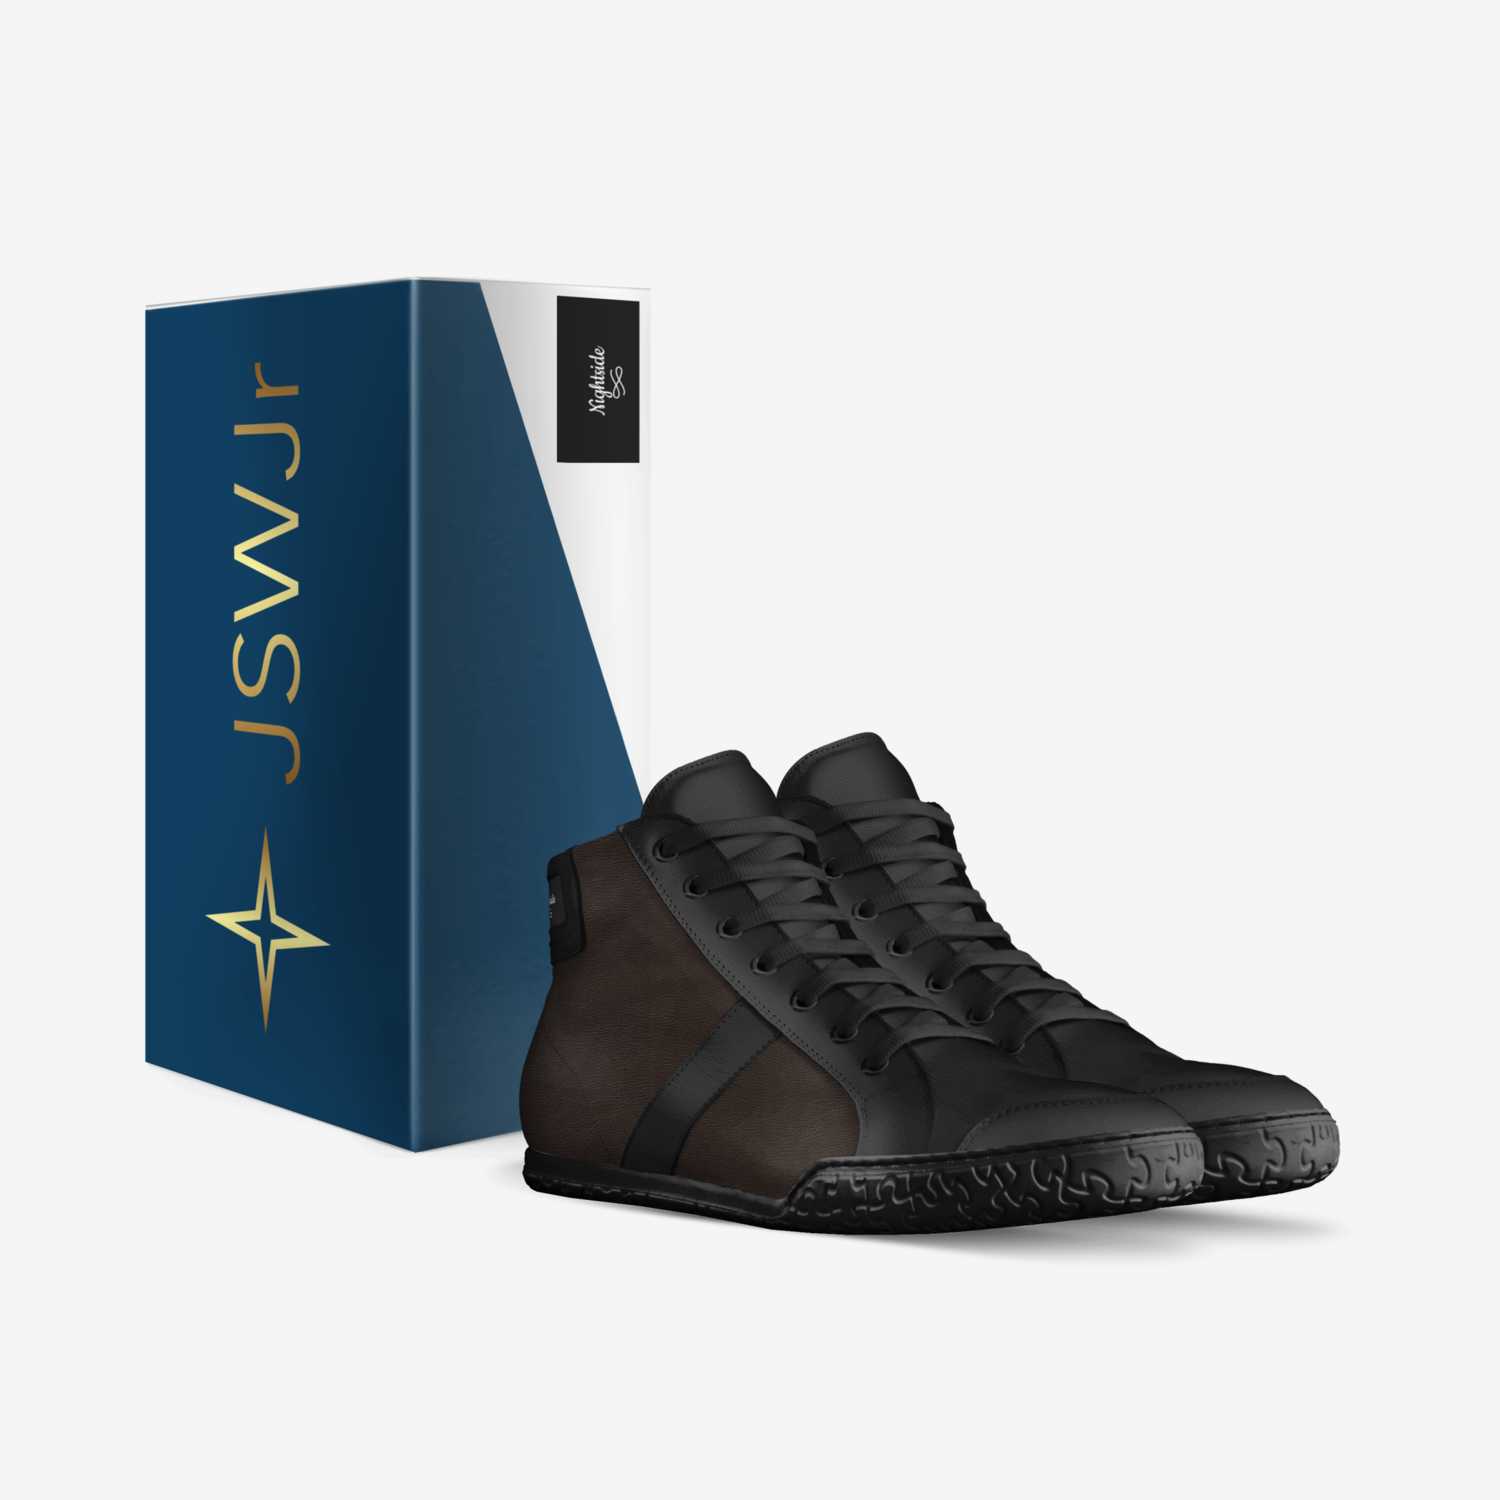 Nightside custom made in Italy shoes by Joseph Williams | Box view